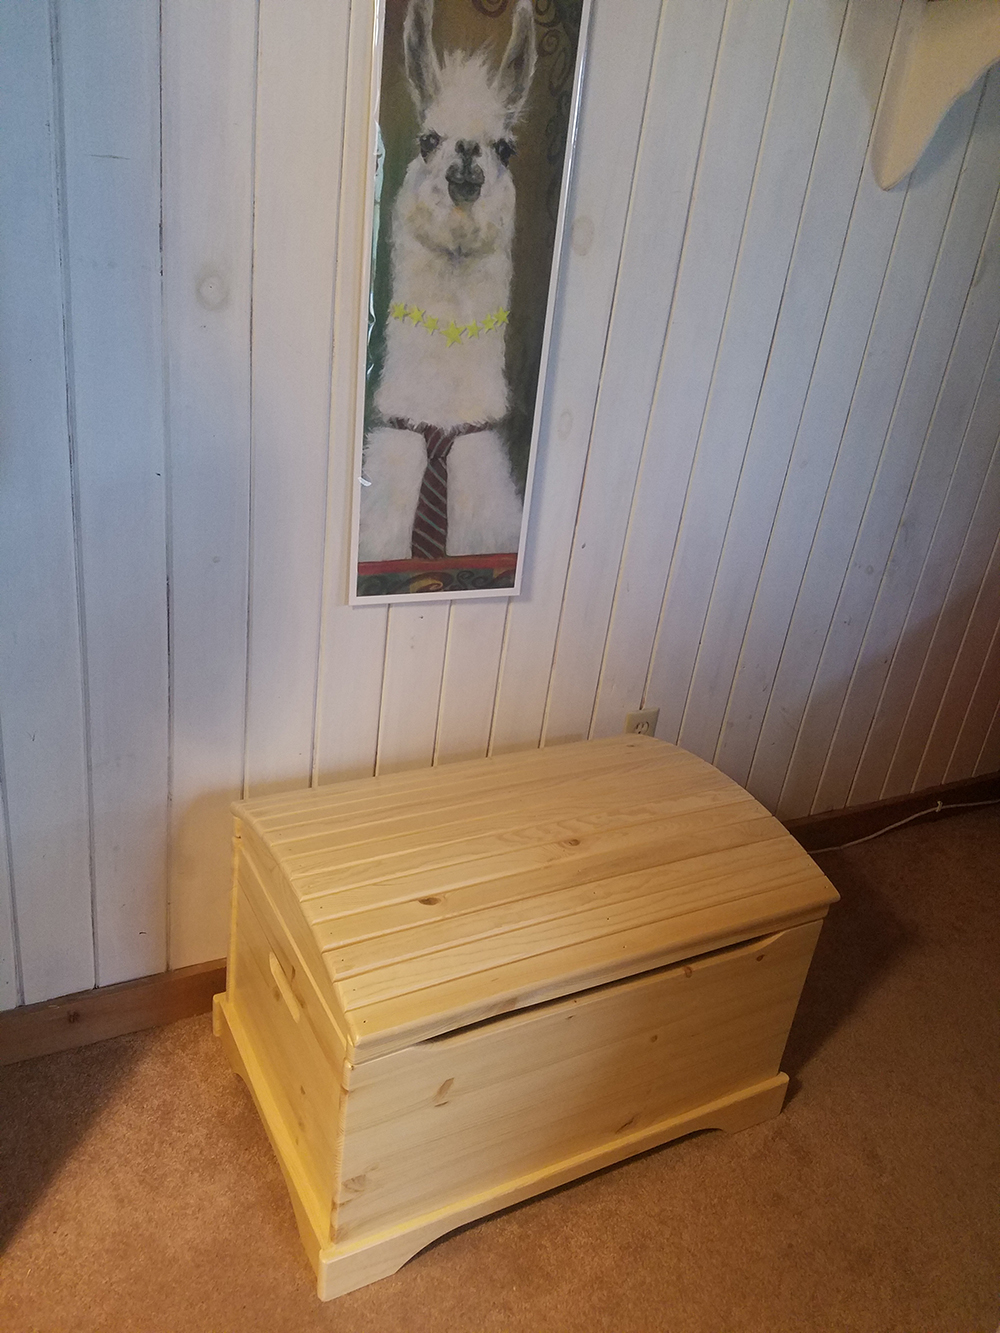 Review: Captain's Chest Wooden Toy Box - It's The Perfect Storage For Yarn!